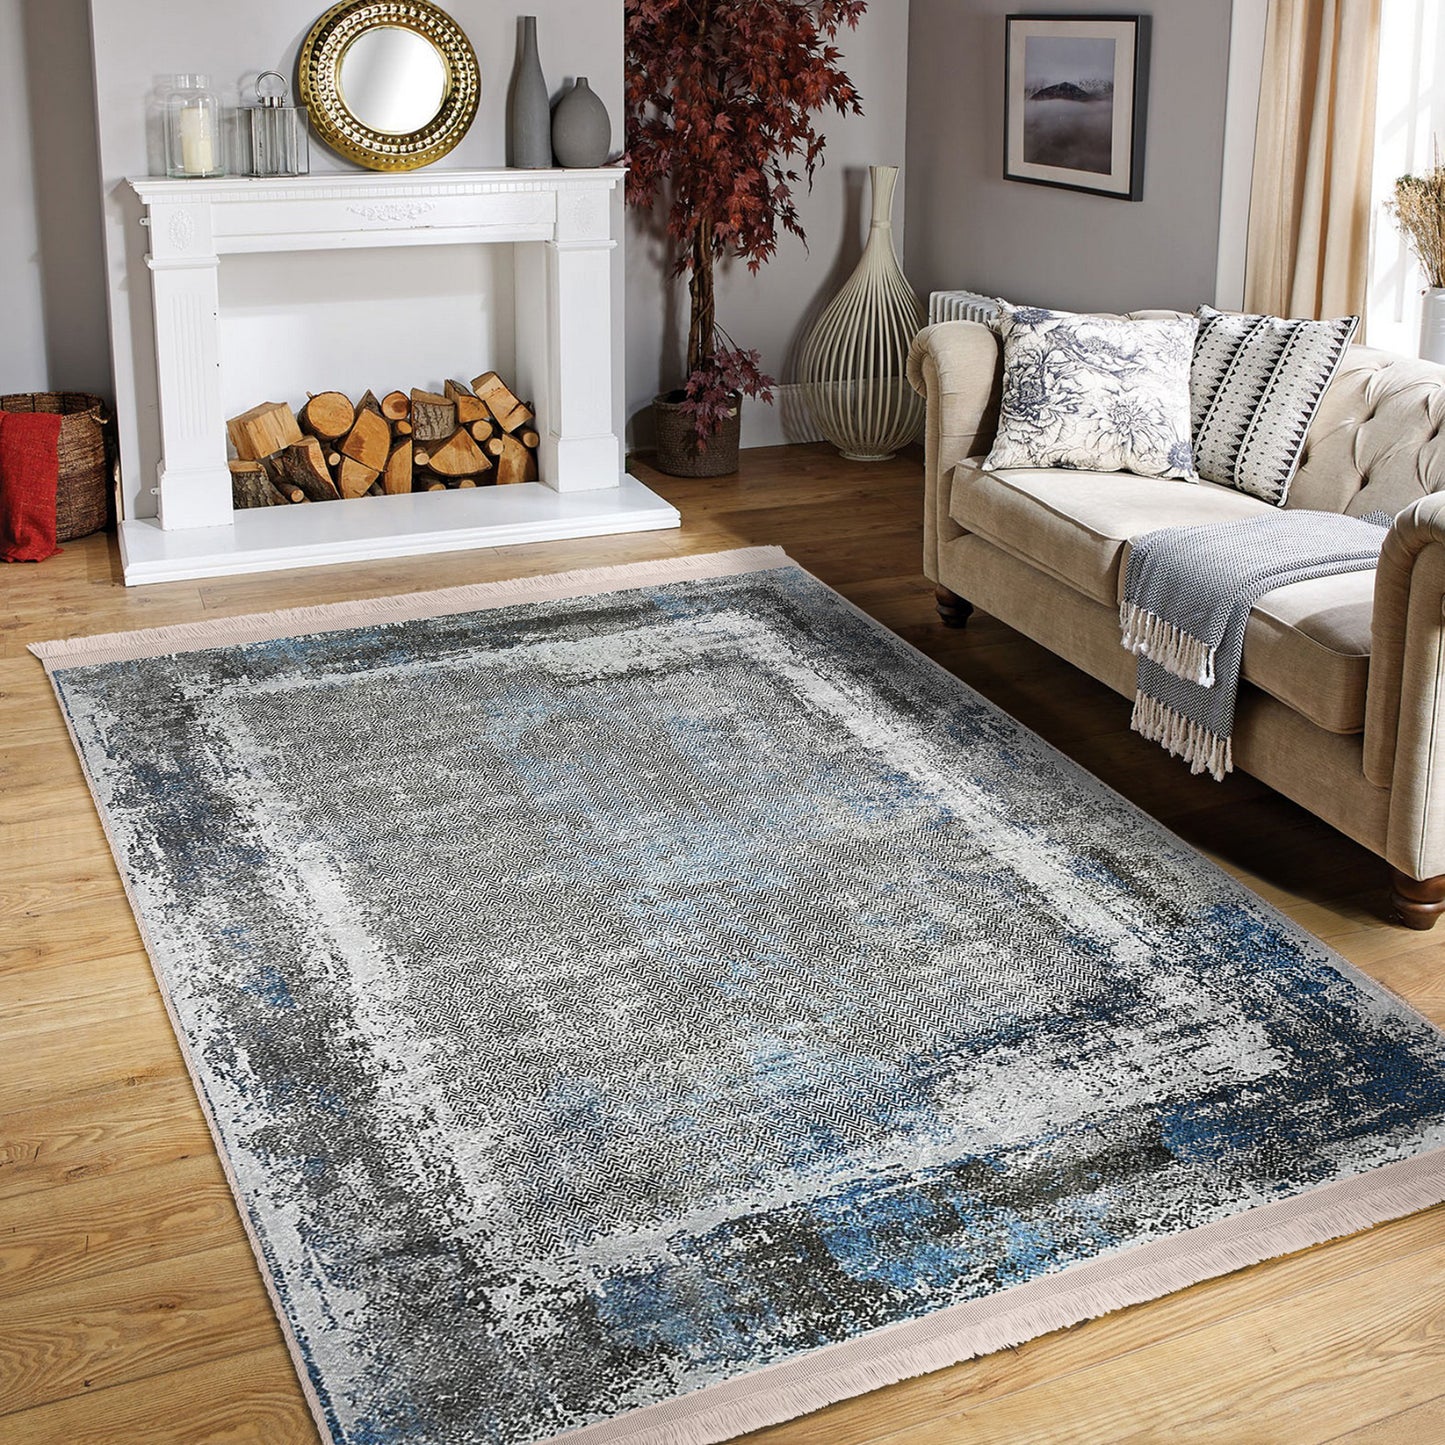 Artistic Classic Rug with Timeless Elegance